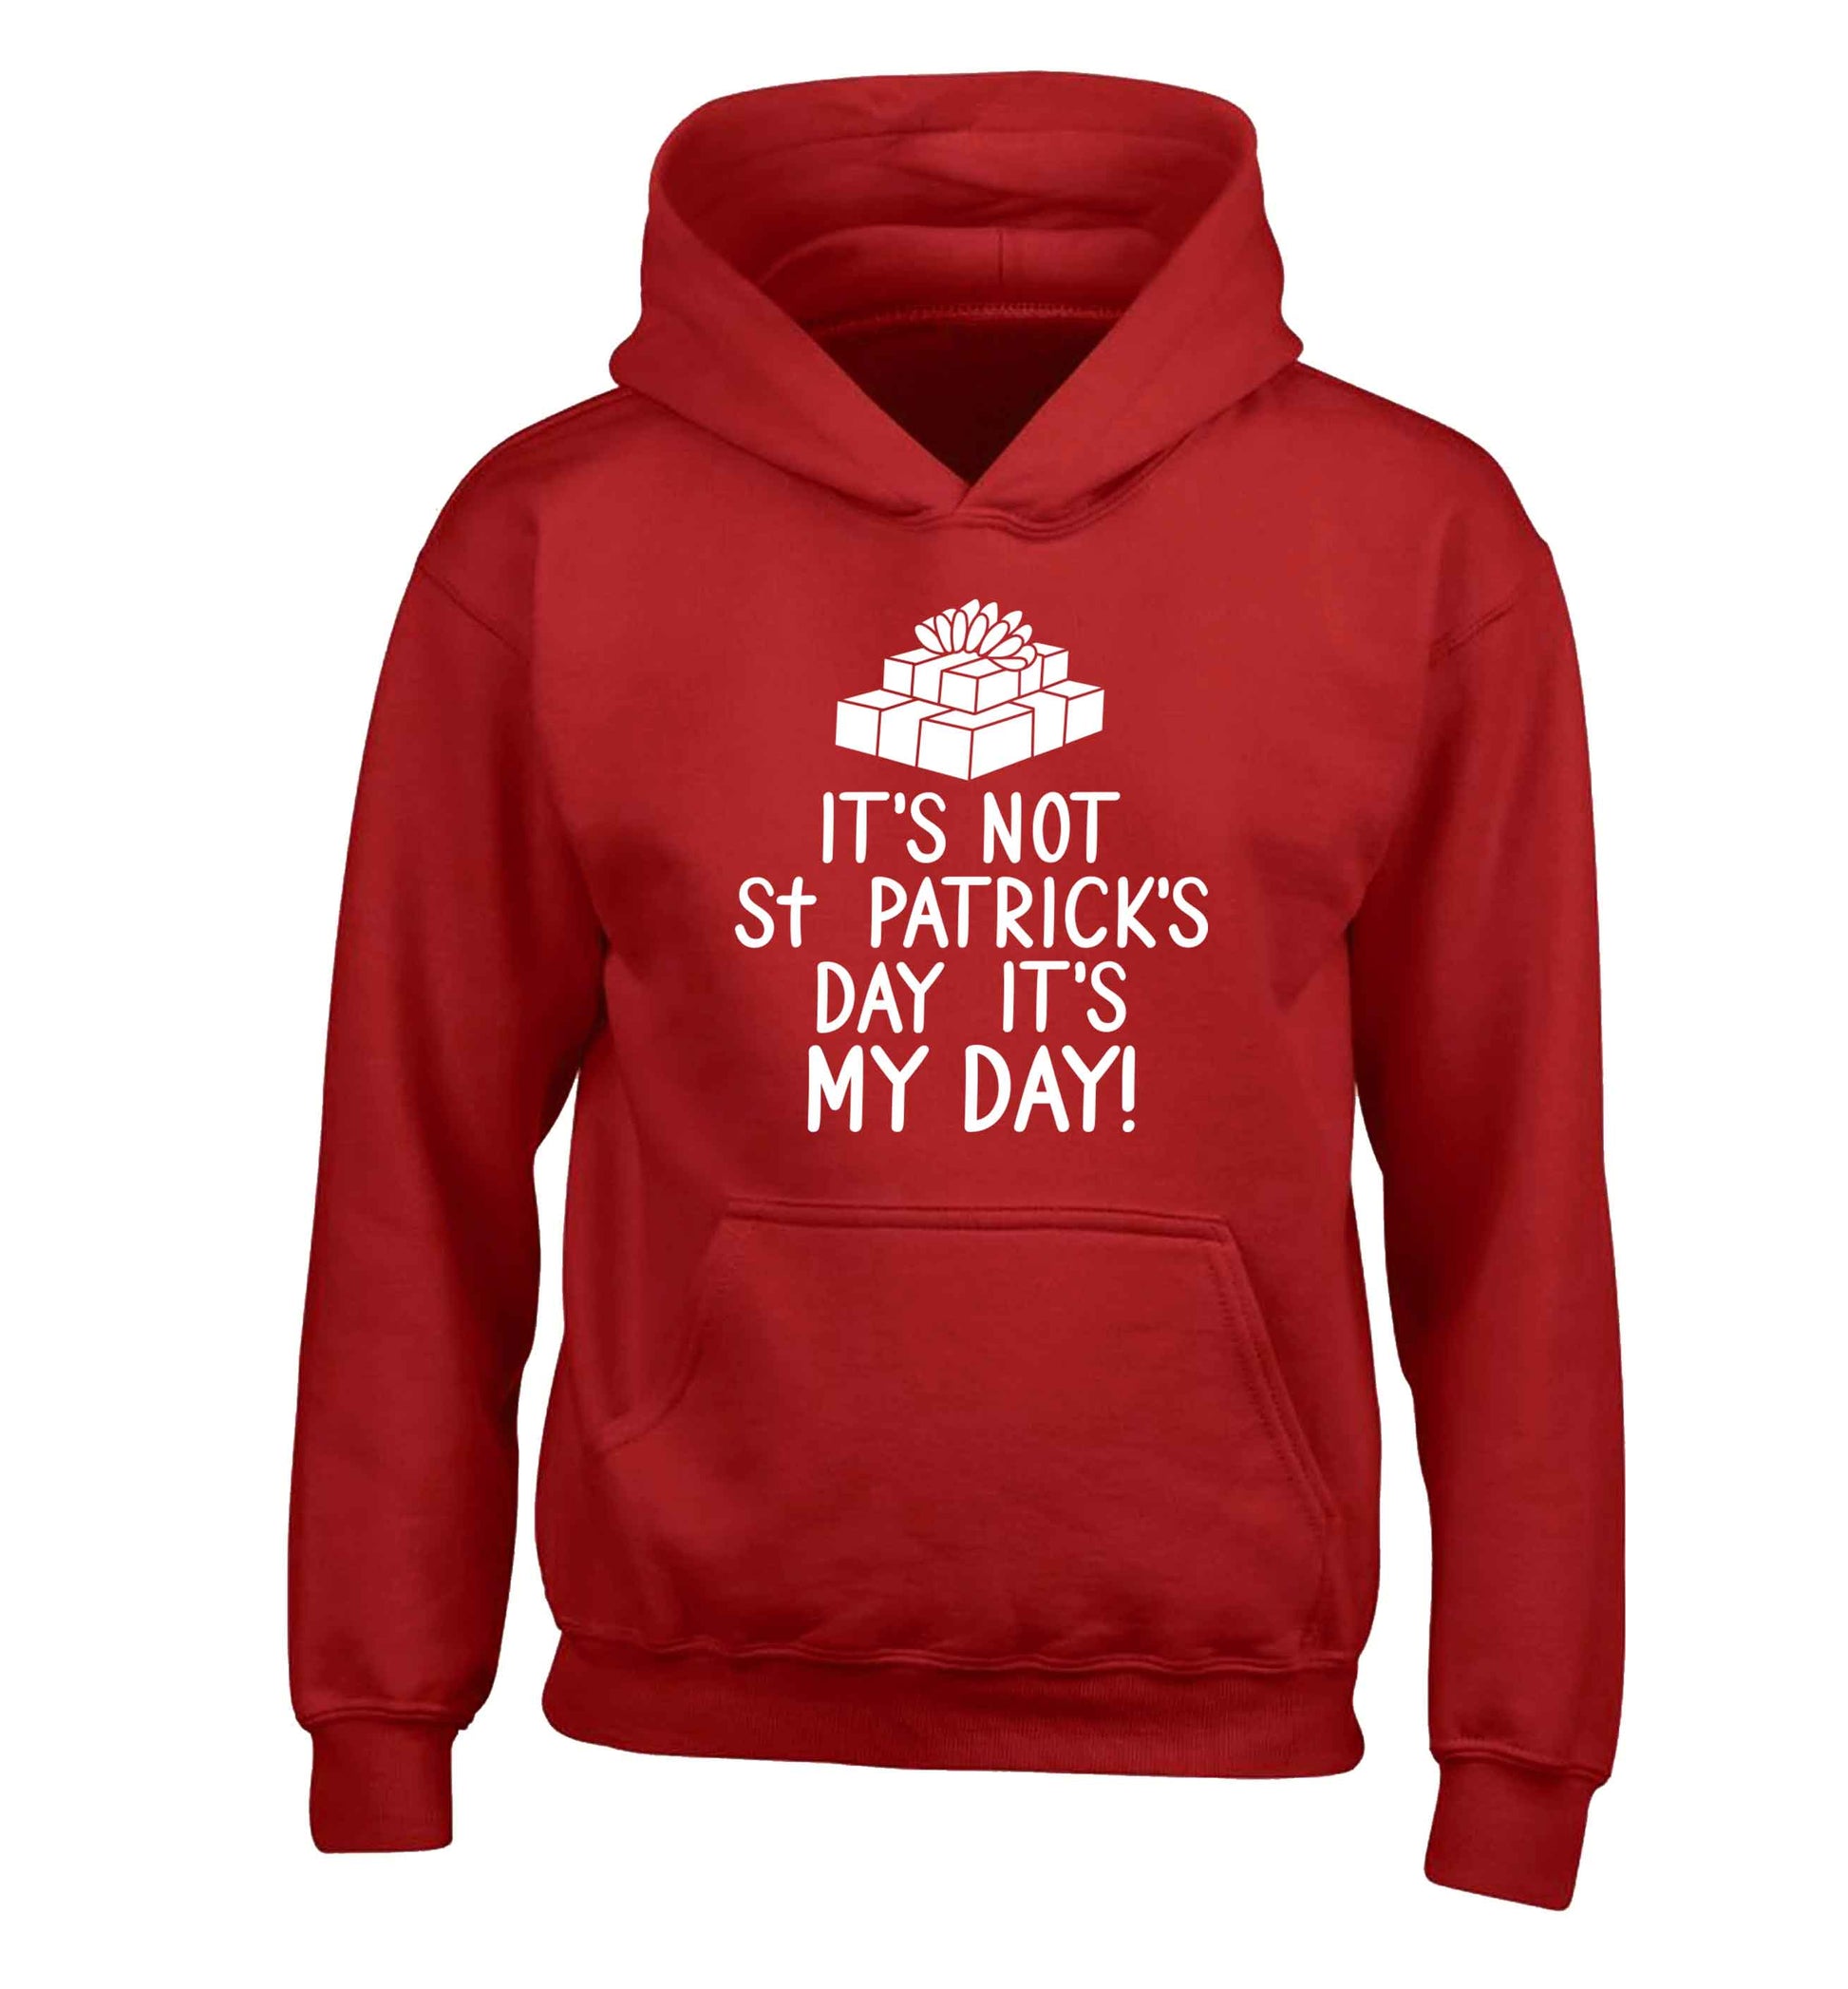 Funny gifts for your mum on mother's dayor her birthday! It's not St Patricks day it's my day children's red hoodie 12-13 Years